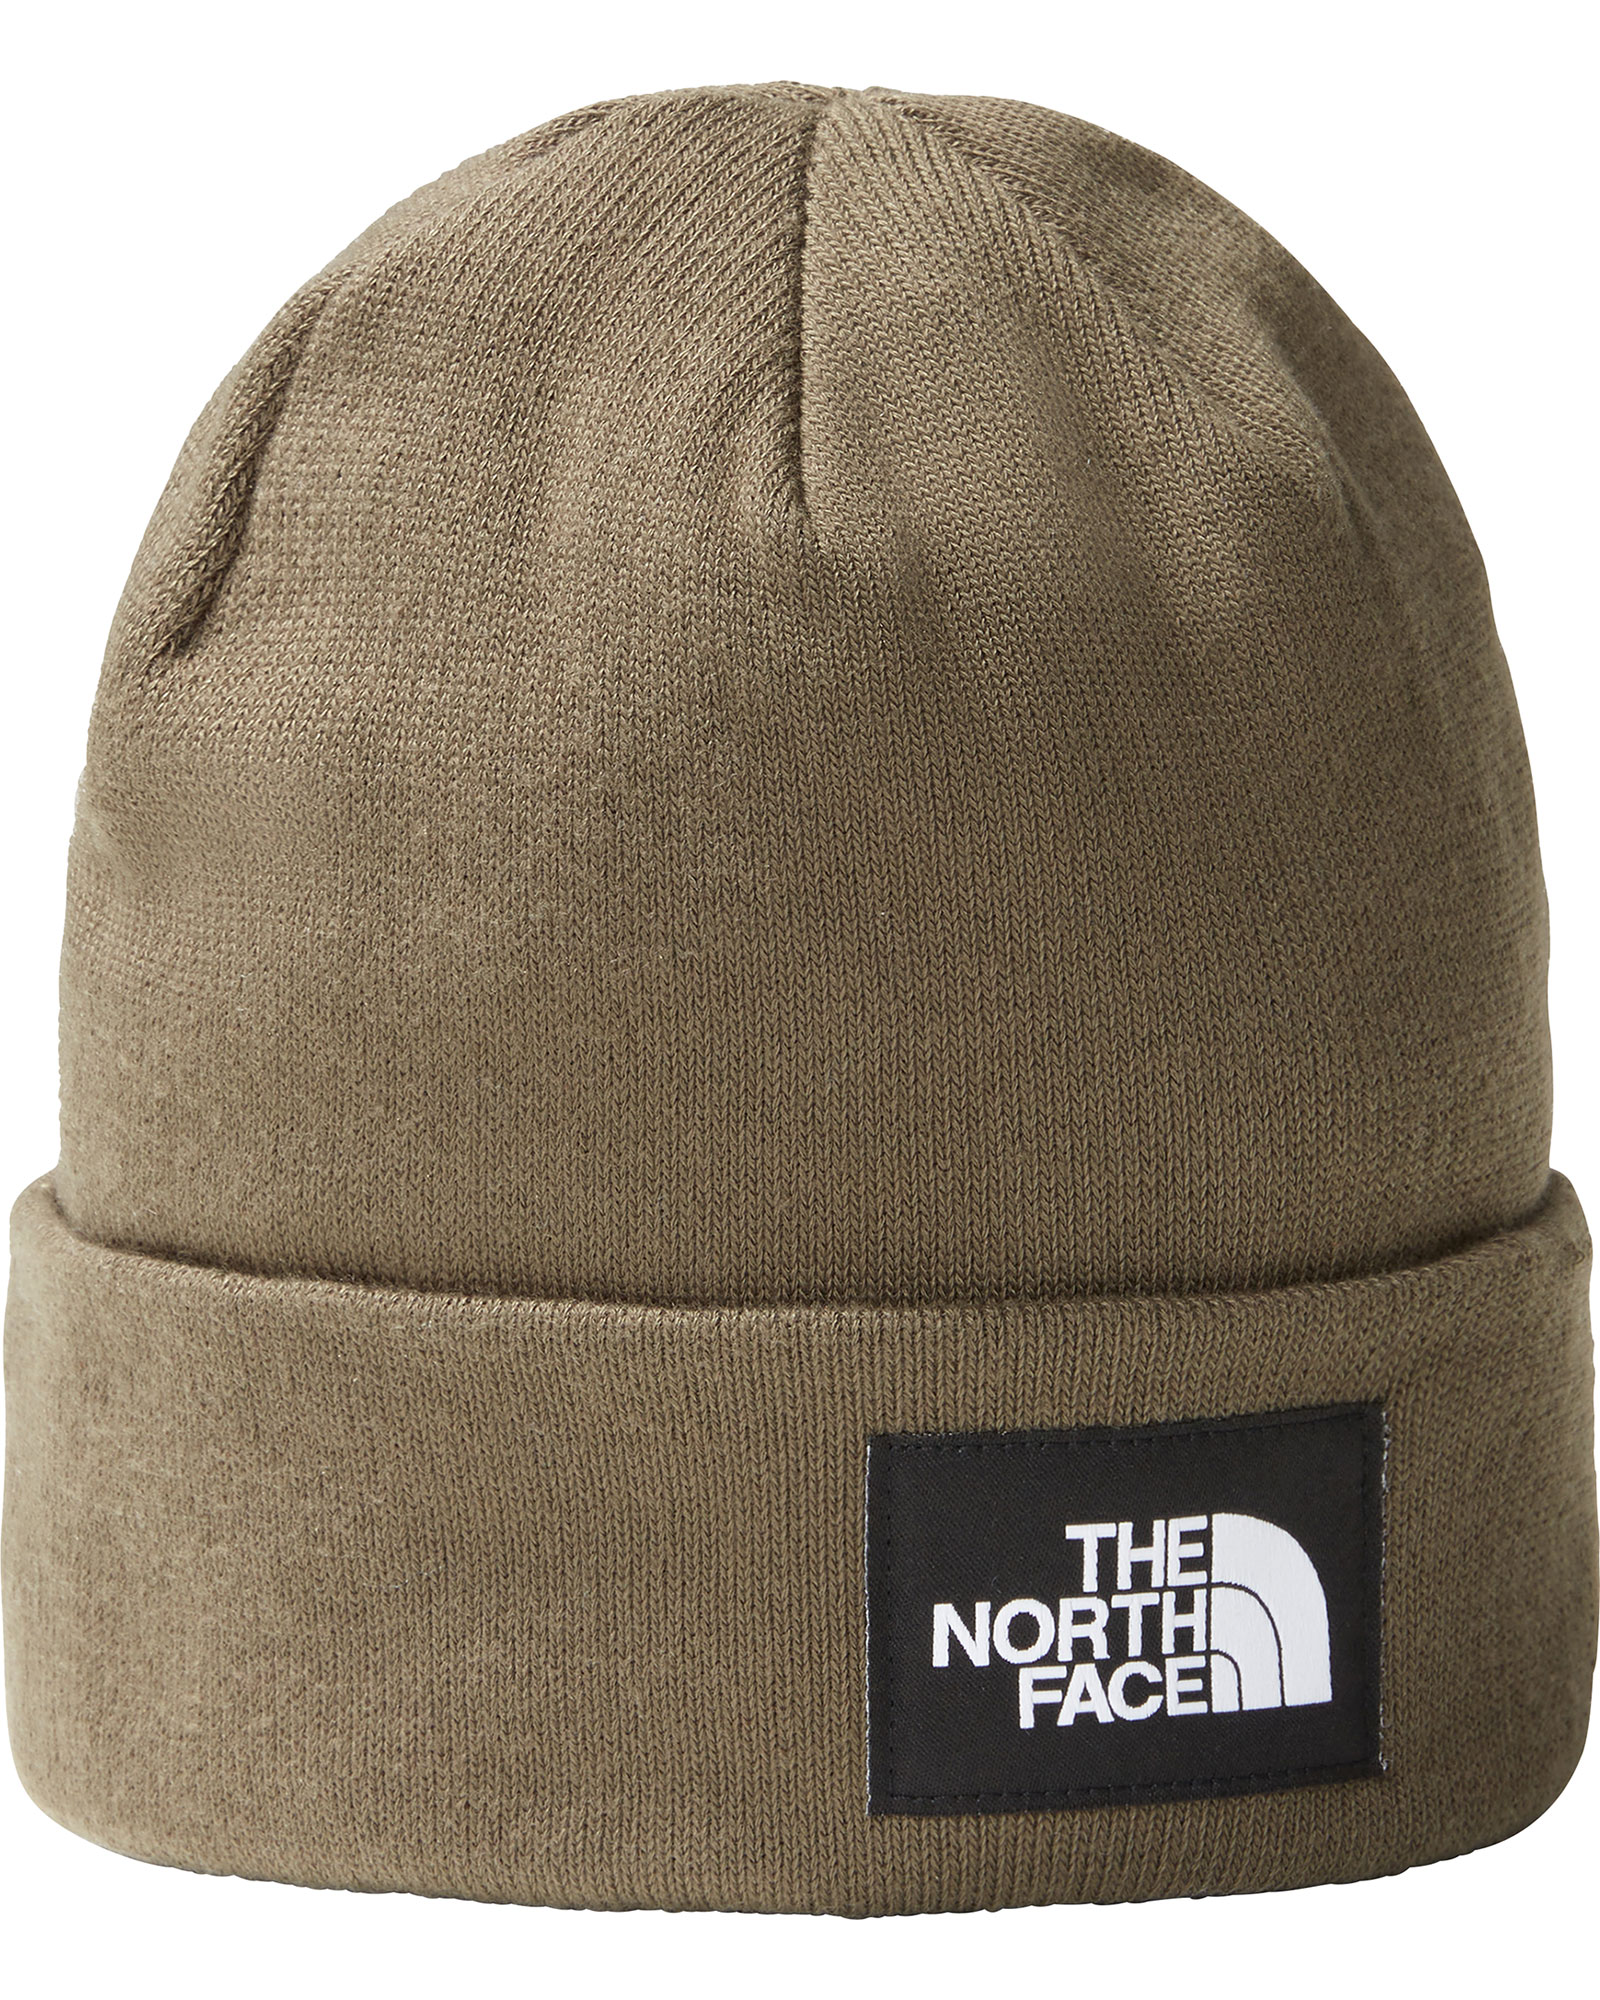 The North Face Dock Worker Recycled Beanie - New Taupe Green